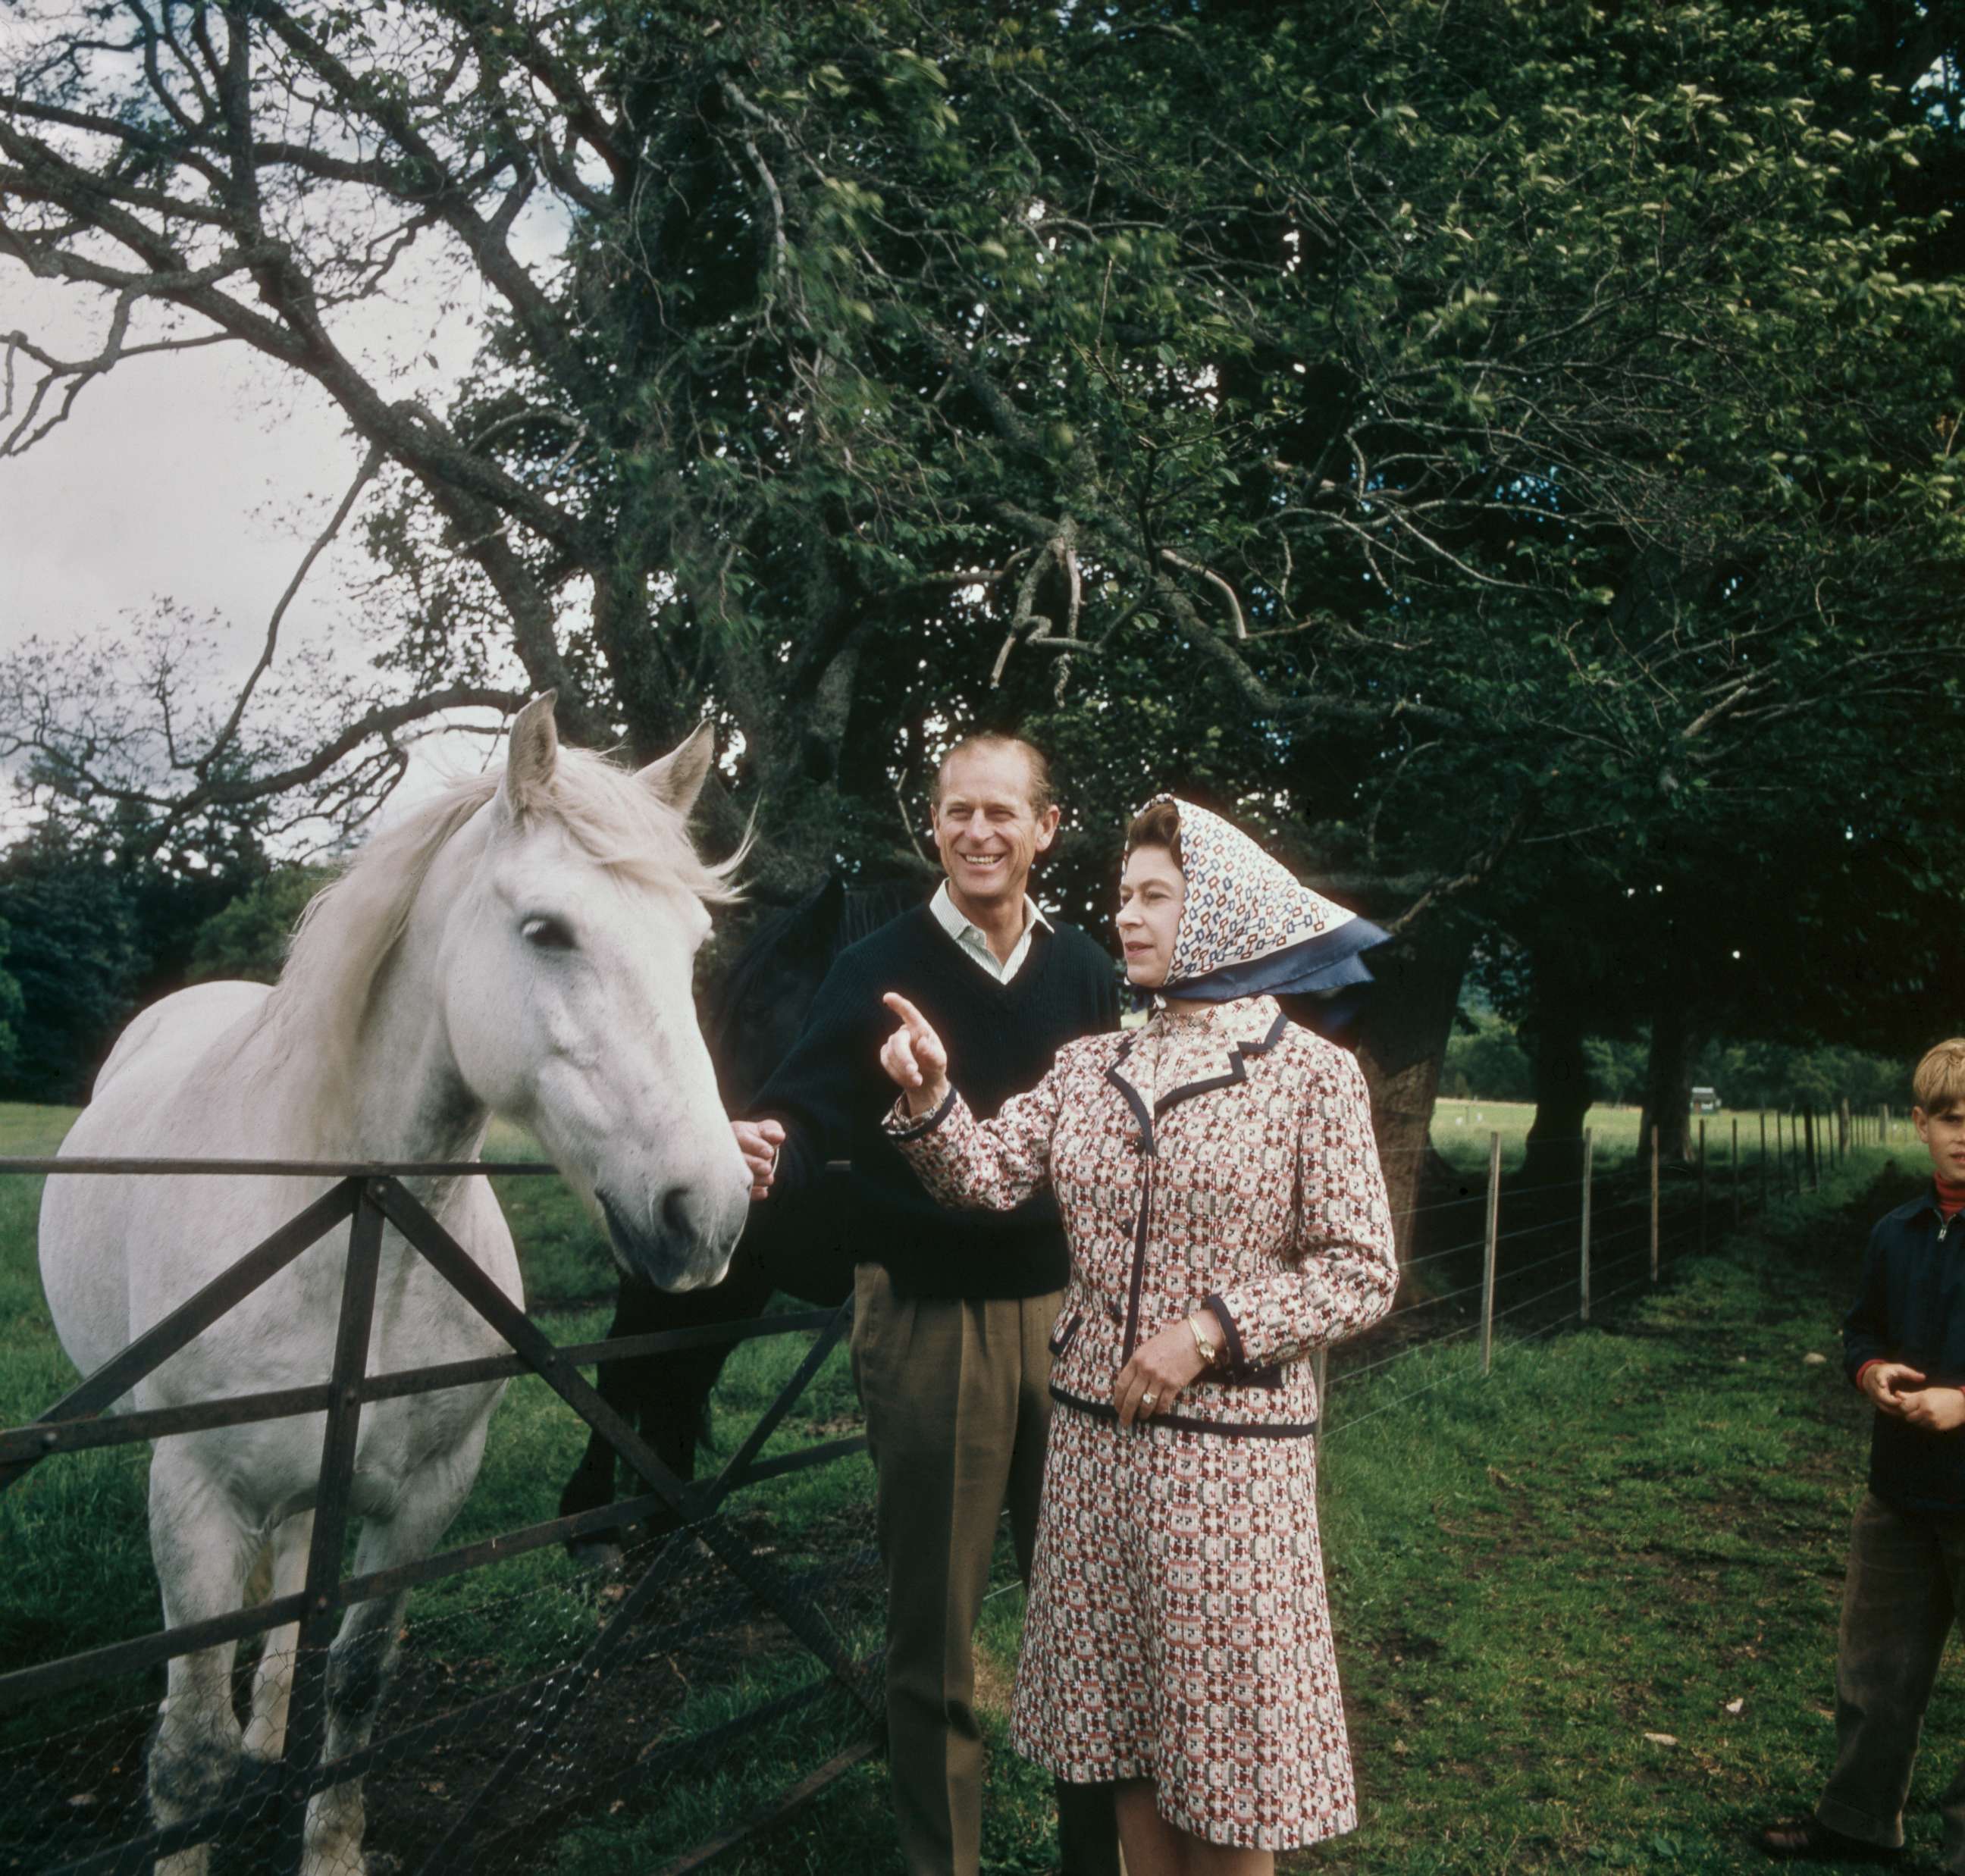 PHOTO: Queen Elizabeth II and Prince Philip visit a farm on the Balmoral estate in Scotland, during their Silver Wedding anniversary year, September 1972.